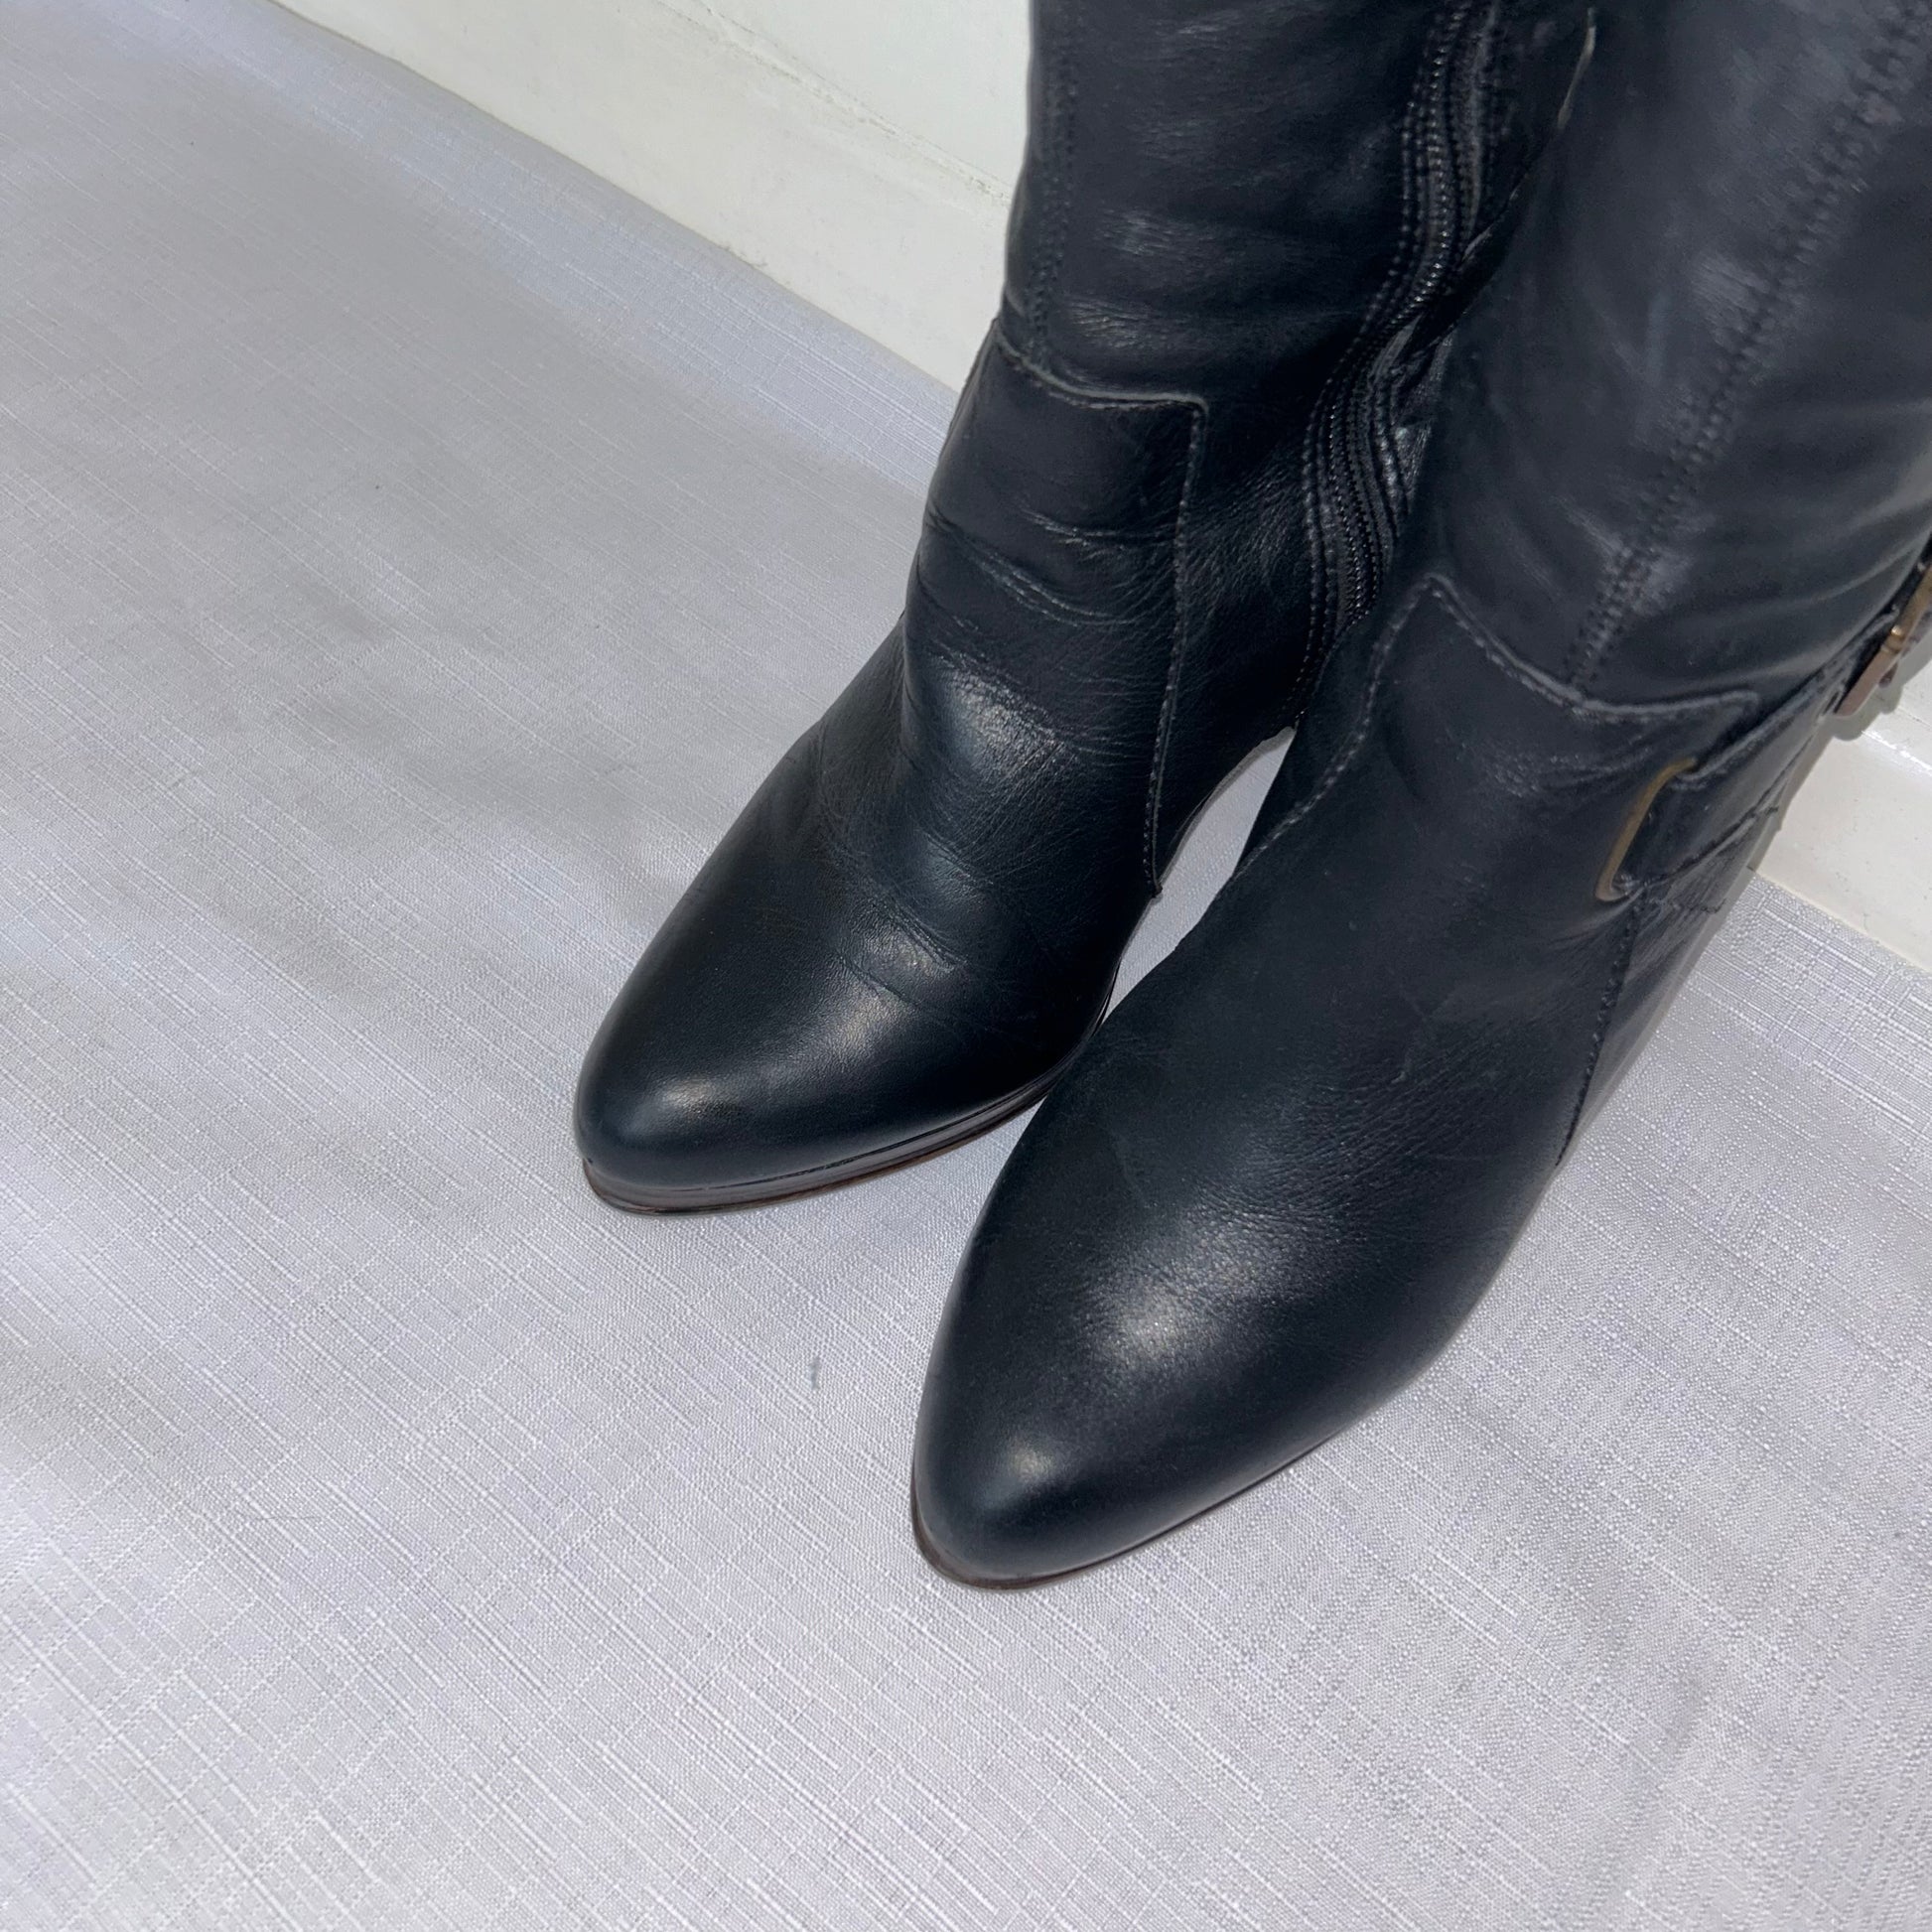 toes of black knee high buckle boots shown on a white background